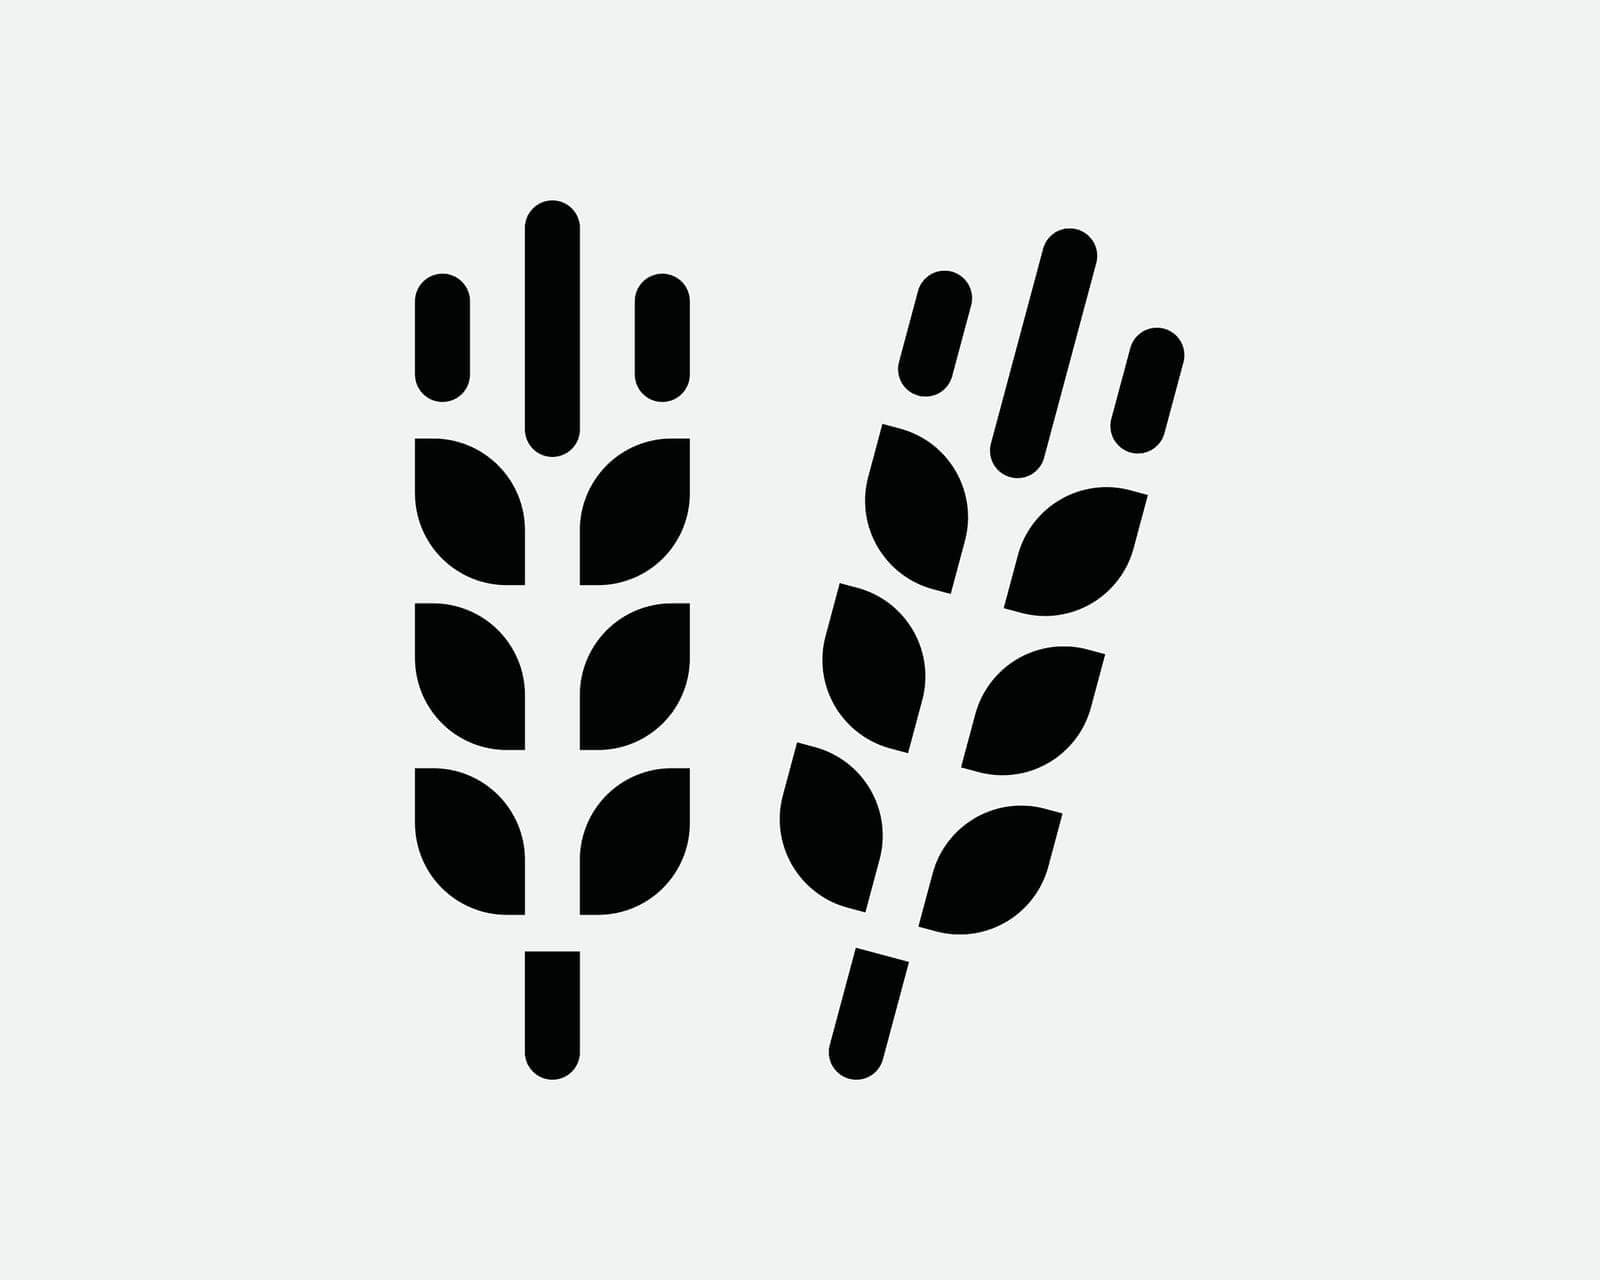 Wheat Rye Barley Grain Seed Plant Harvest Cereal Organic Healthy Crop Black and White Icon Sign Symbol Vector Artwork Clipart Illustration